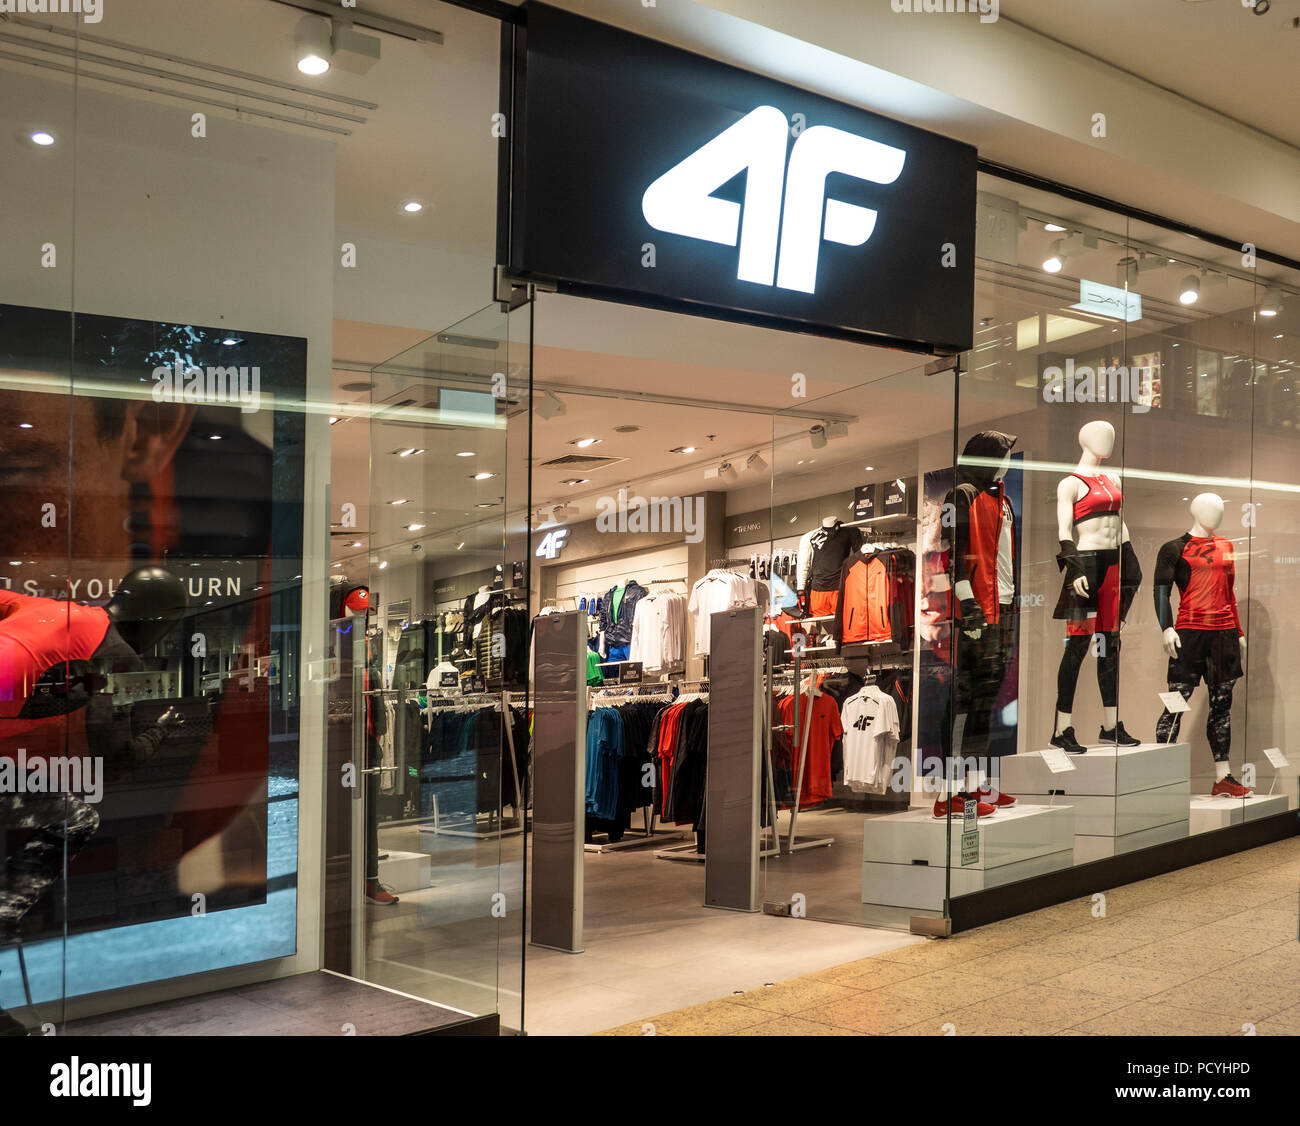 POLAND, KRAKOW - March 19, 2018: 4F store in Galeria Krakowska. 4f is a  leading Polish company producing high quality sportswear and tourism  clothing Stock Photo - Alamy